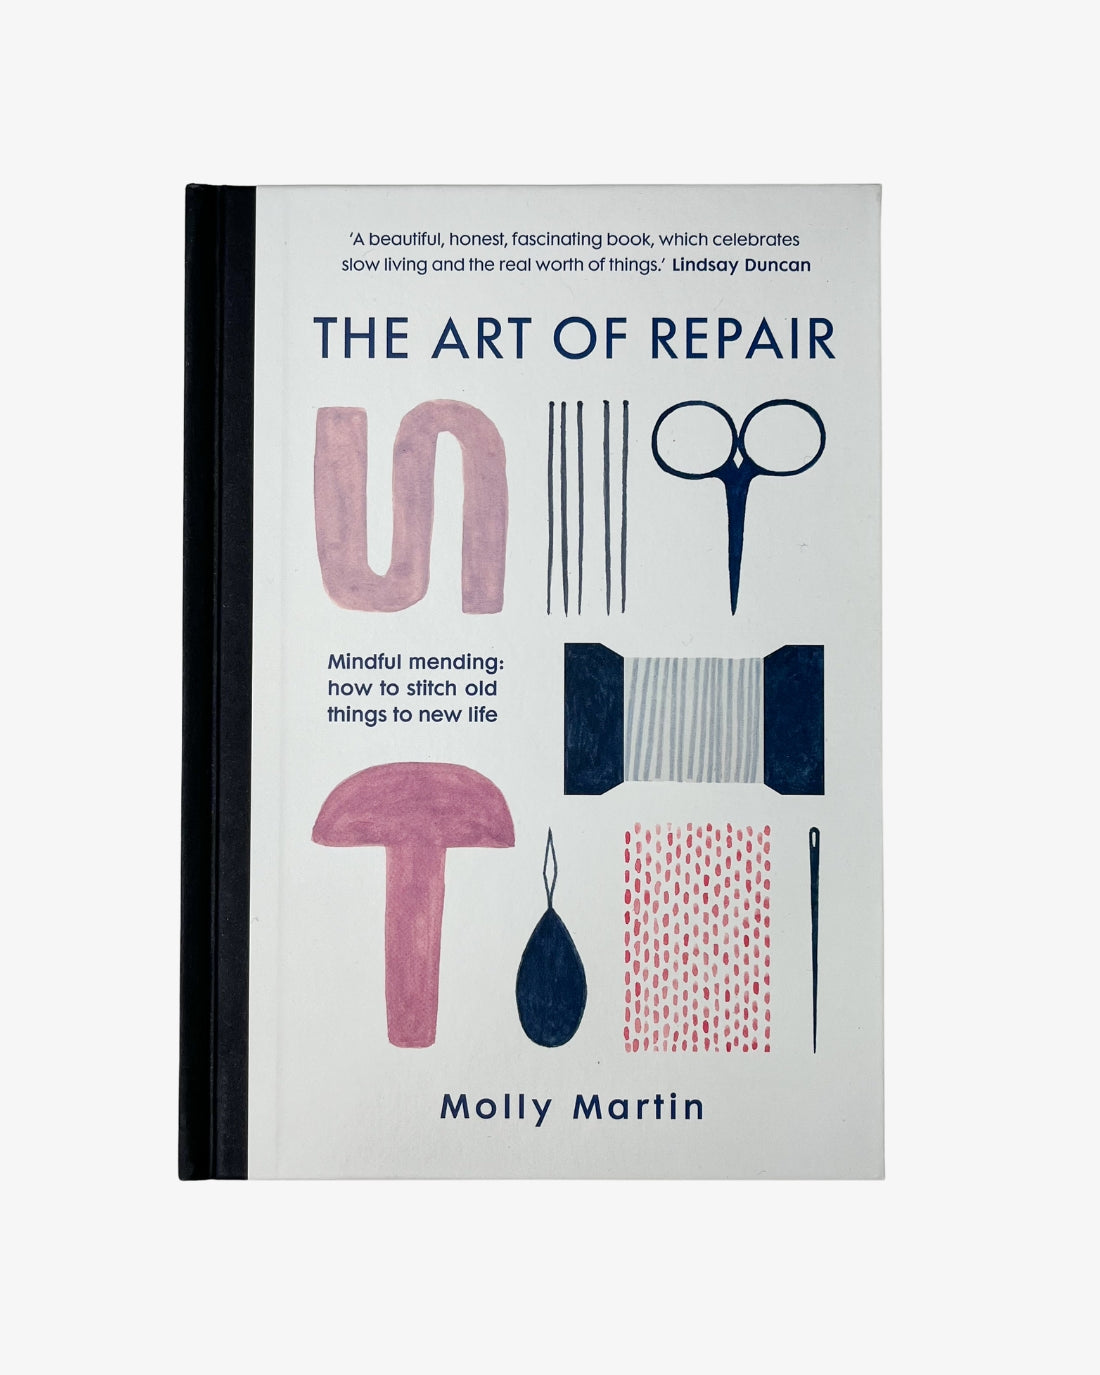 The Art of Repair by Molly Martin